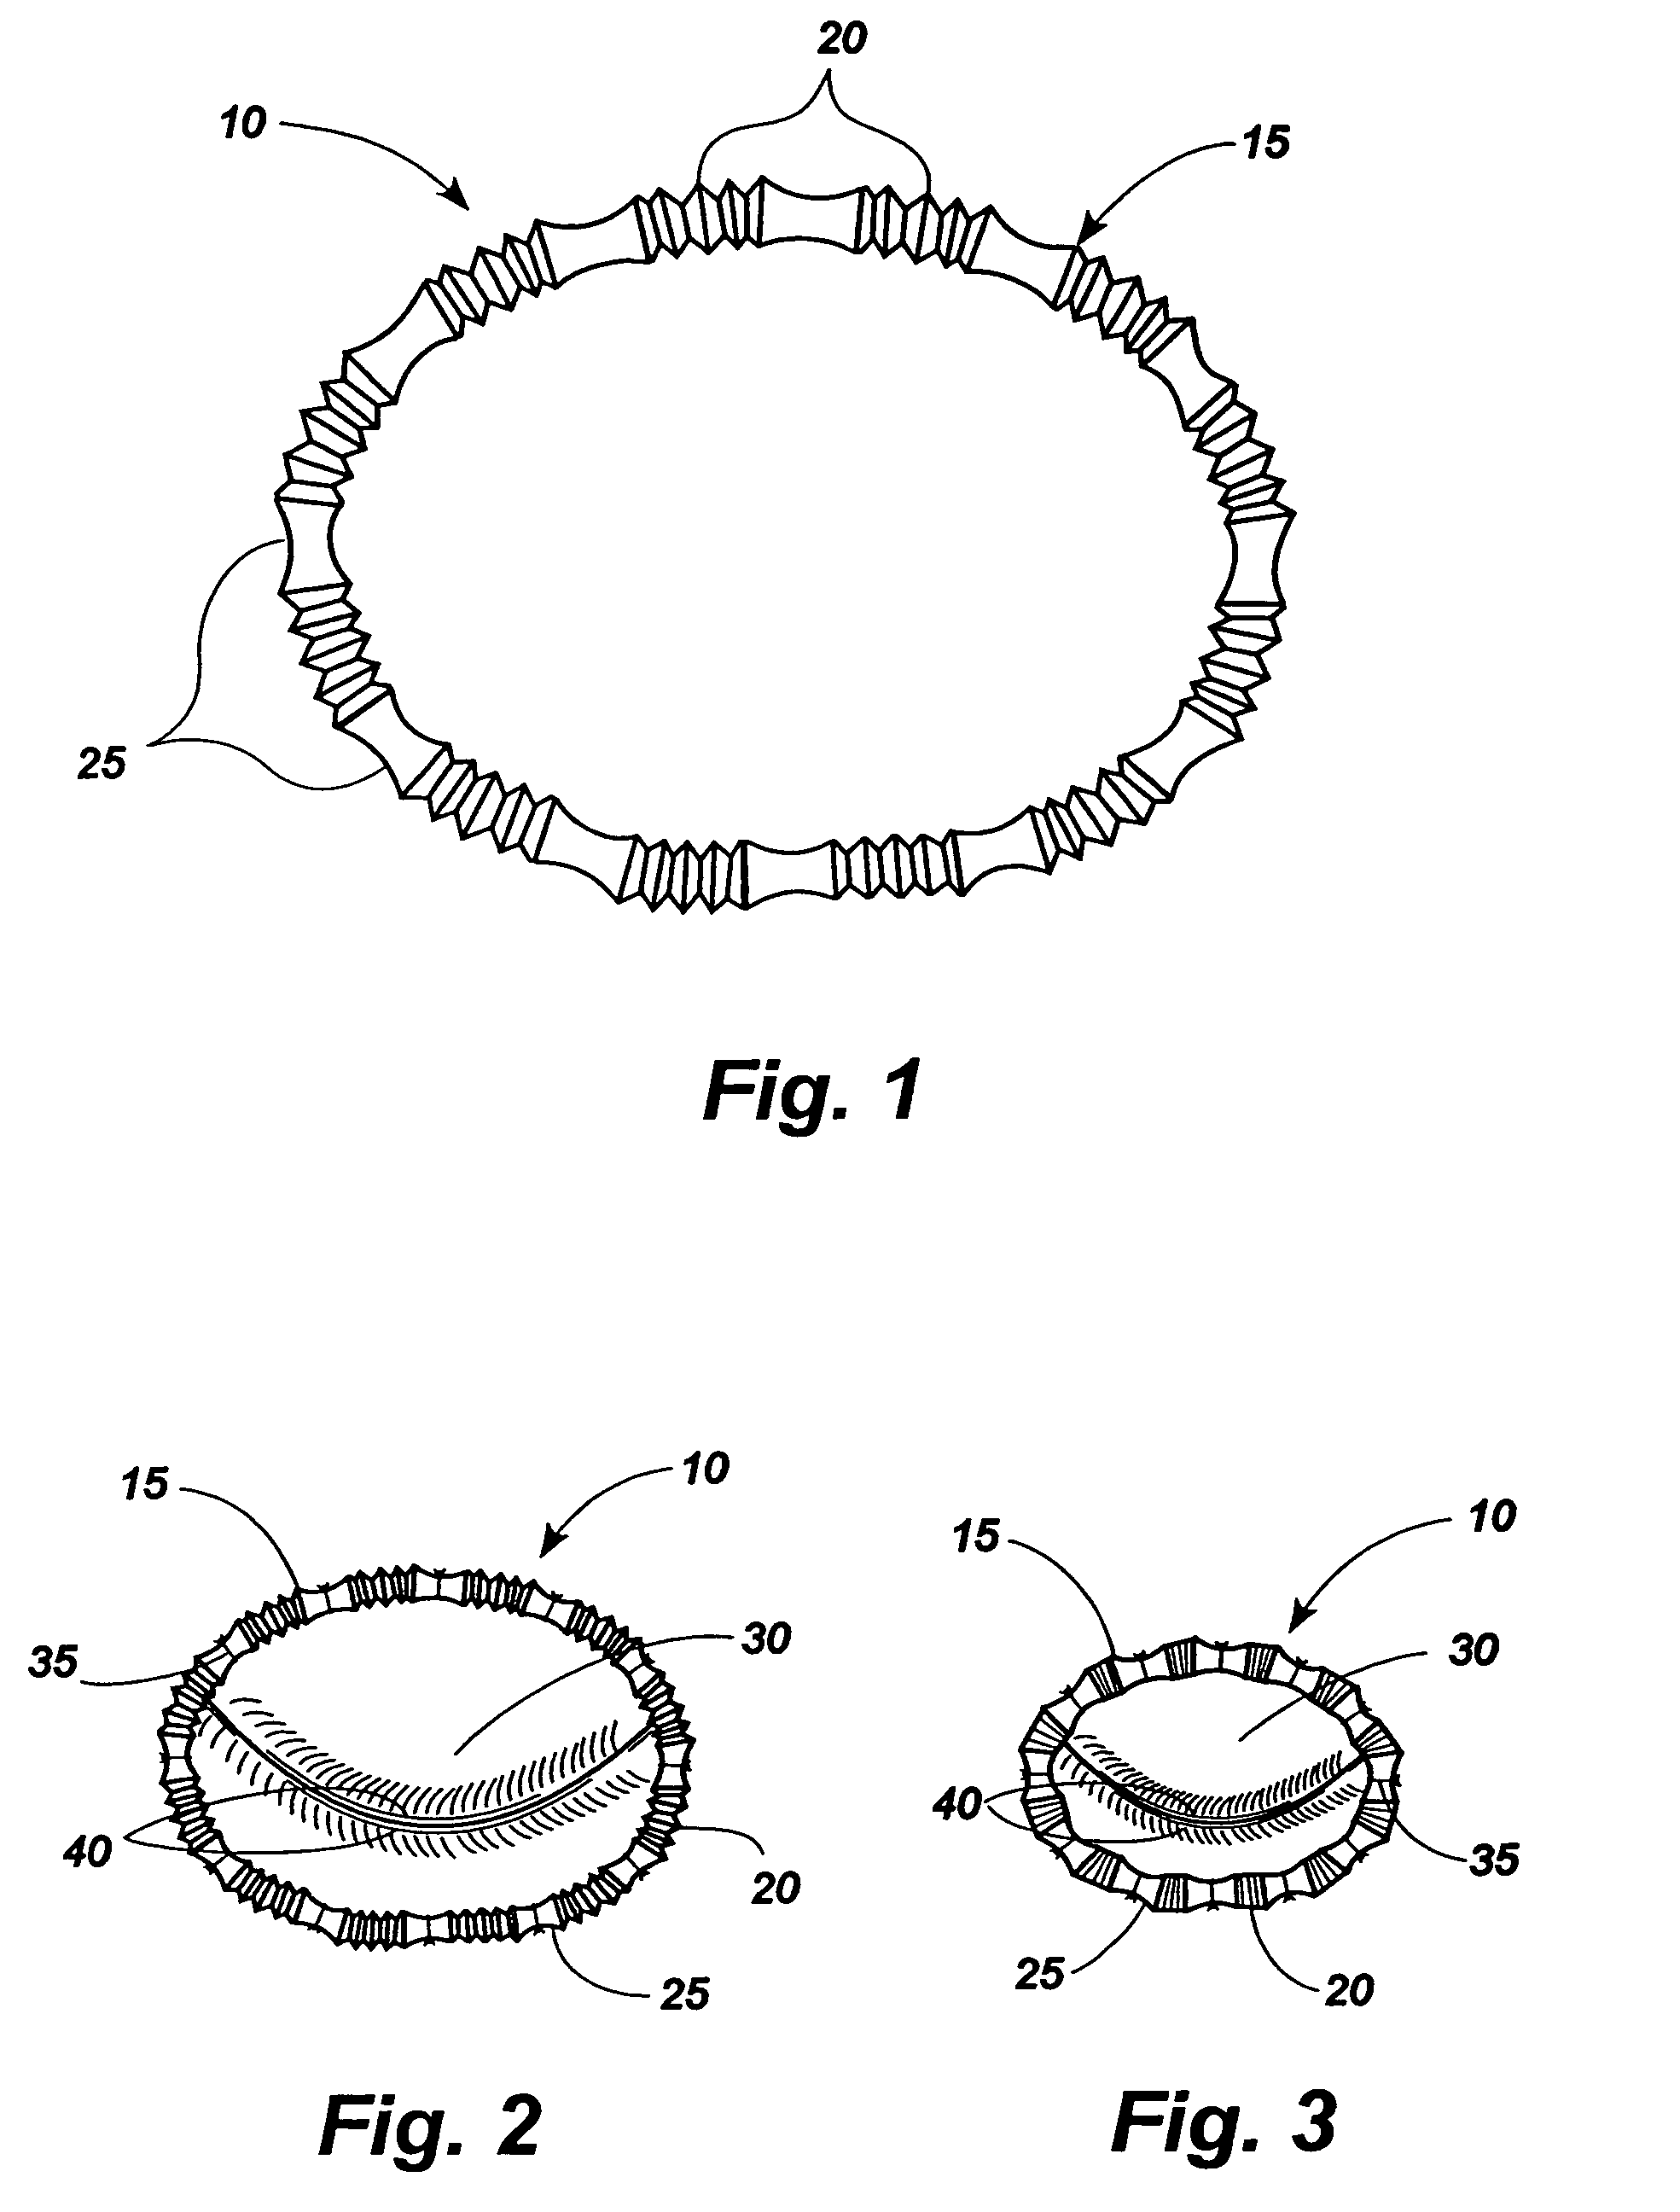 Apparatus for implanting surgical devices for controlling the internal circumference of an anatomic orifice or lumen